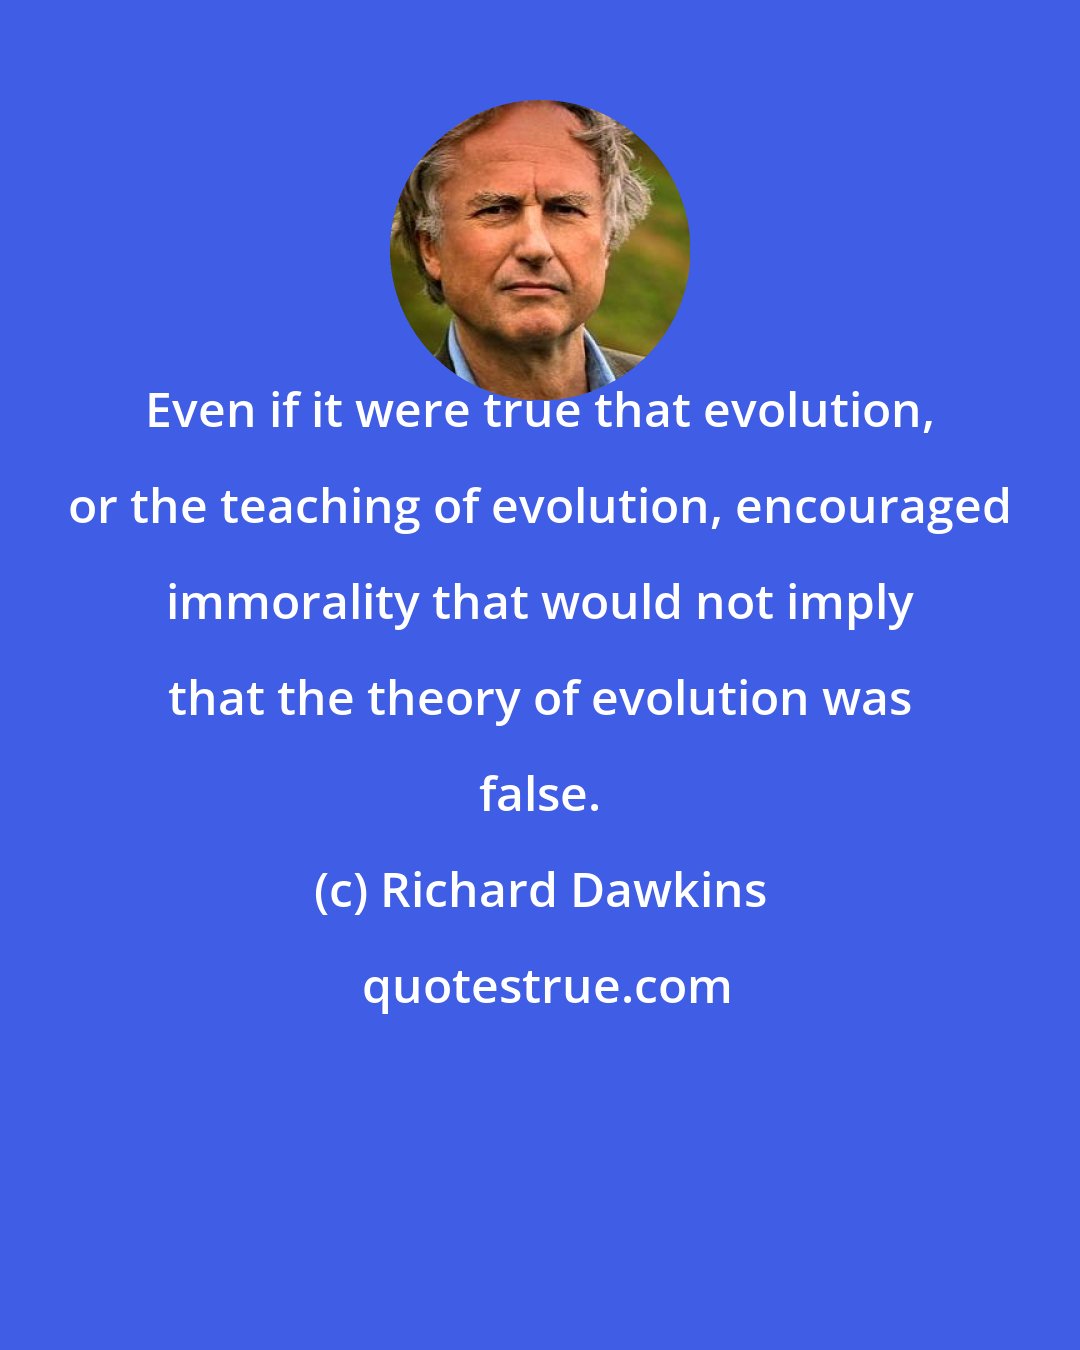 Richard Dawkins: Even if it were true that evolution, or the teaching of evolution, encouraged immorality that would not imply that the theory of evolution was false.